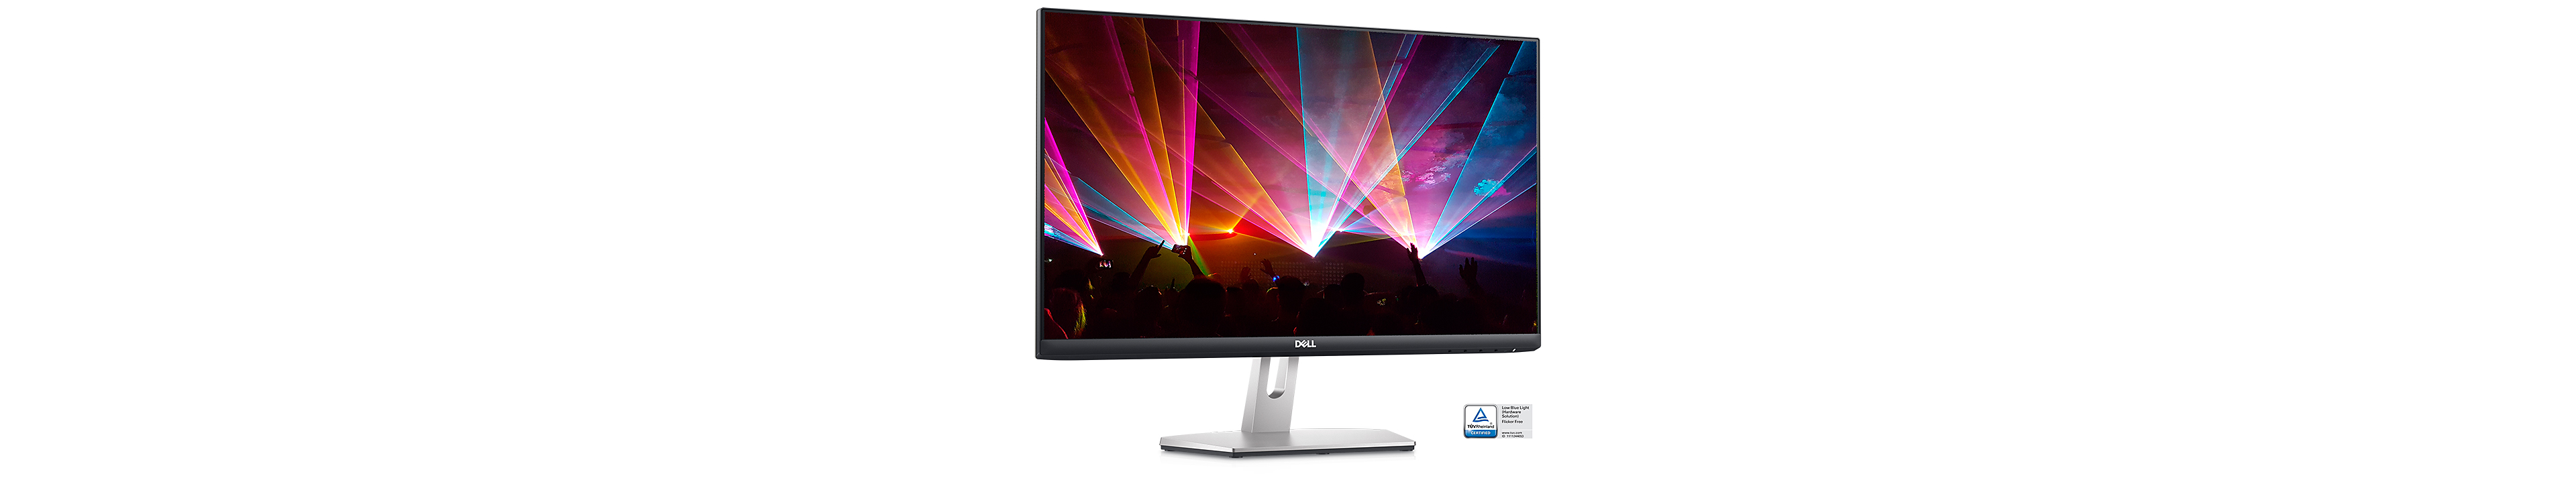 https://i.dell.com/is/image/DellContent/content/dam/ss2/product-images/peripherals/output-devices/dell/monitors/s-series/s2421hn/pdp/73402-s2421hn-mlk-monitor-pdp-mod2.jpg?wid=3840&fmt=png-alpha&qlt=90%2c0&op_usm=1.75%2c0.3%2c2%2c0&resMode=sharp&pscan=auto&fit=constrain%2c1&align=0%2c0